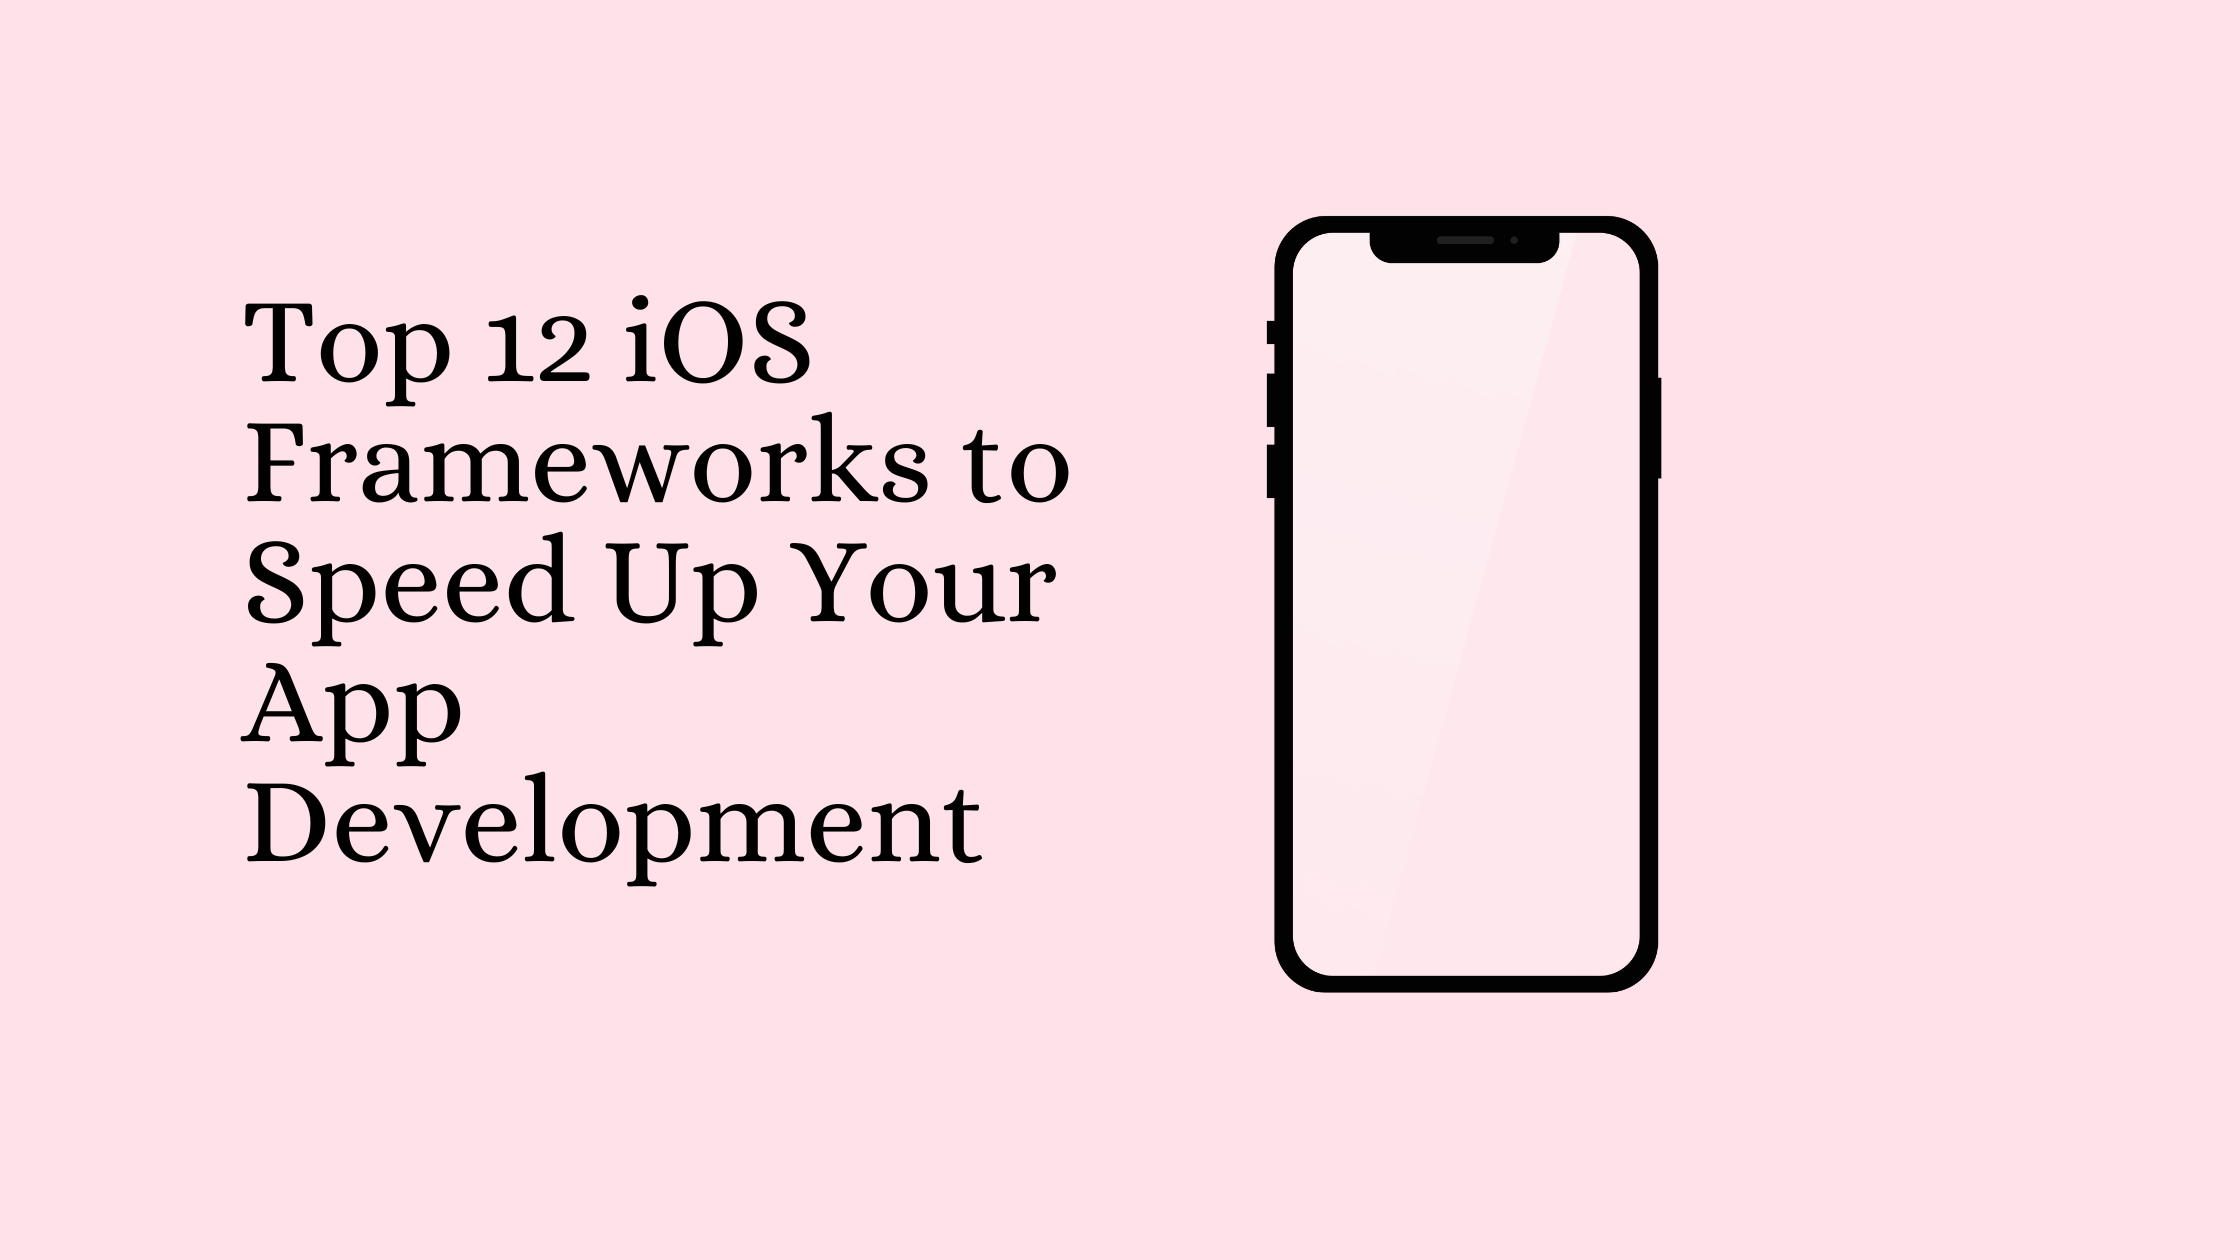 Top 12 iOS Frameworks to Speed Up Your App Development